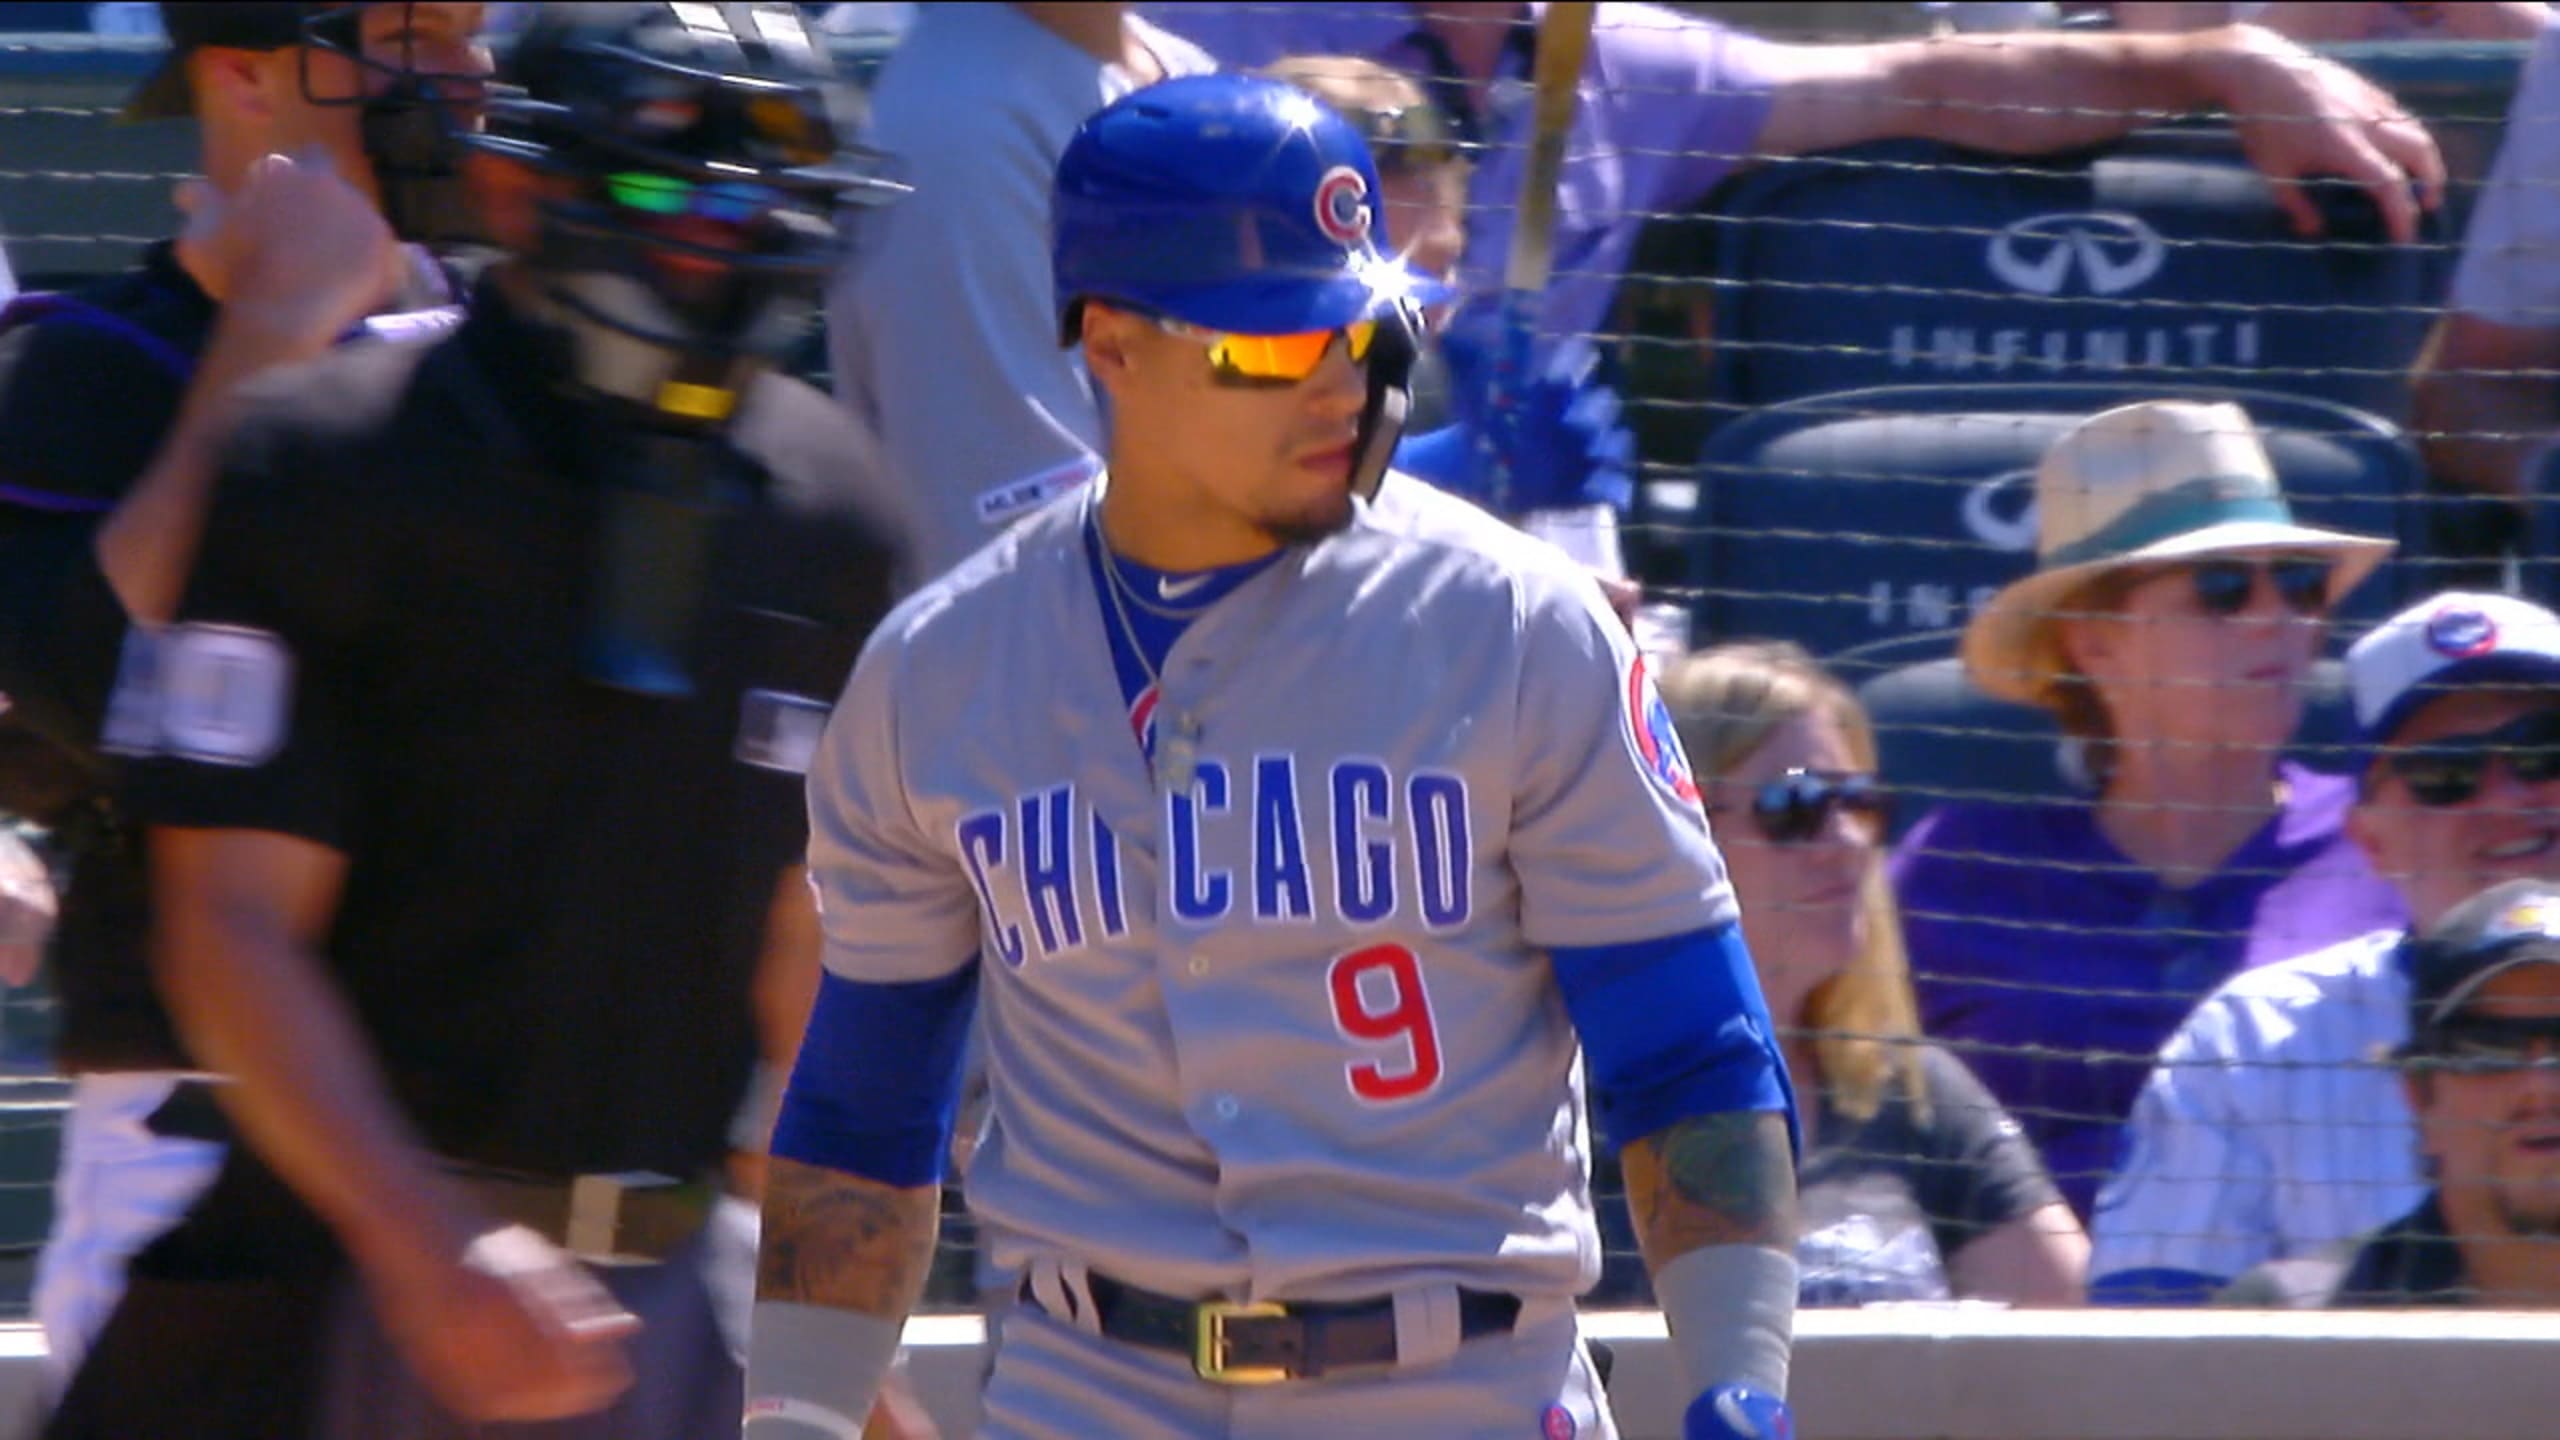 Photo: Cubs Javier Baez smiles after stealing second base against Brewers  in Chicago - CHI2018042709 